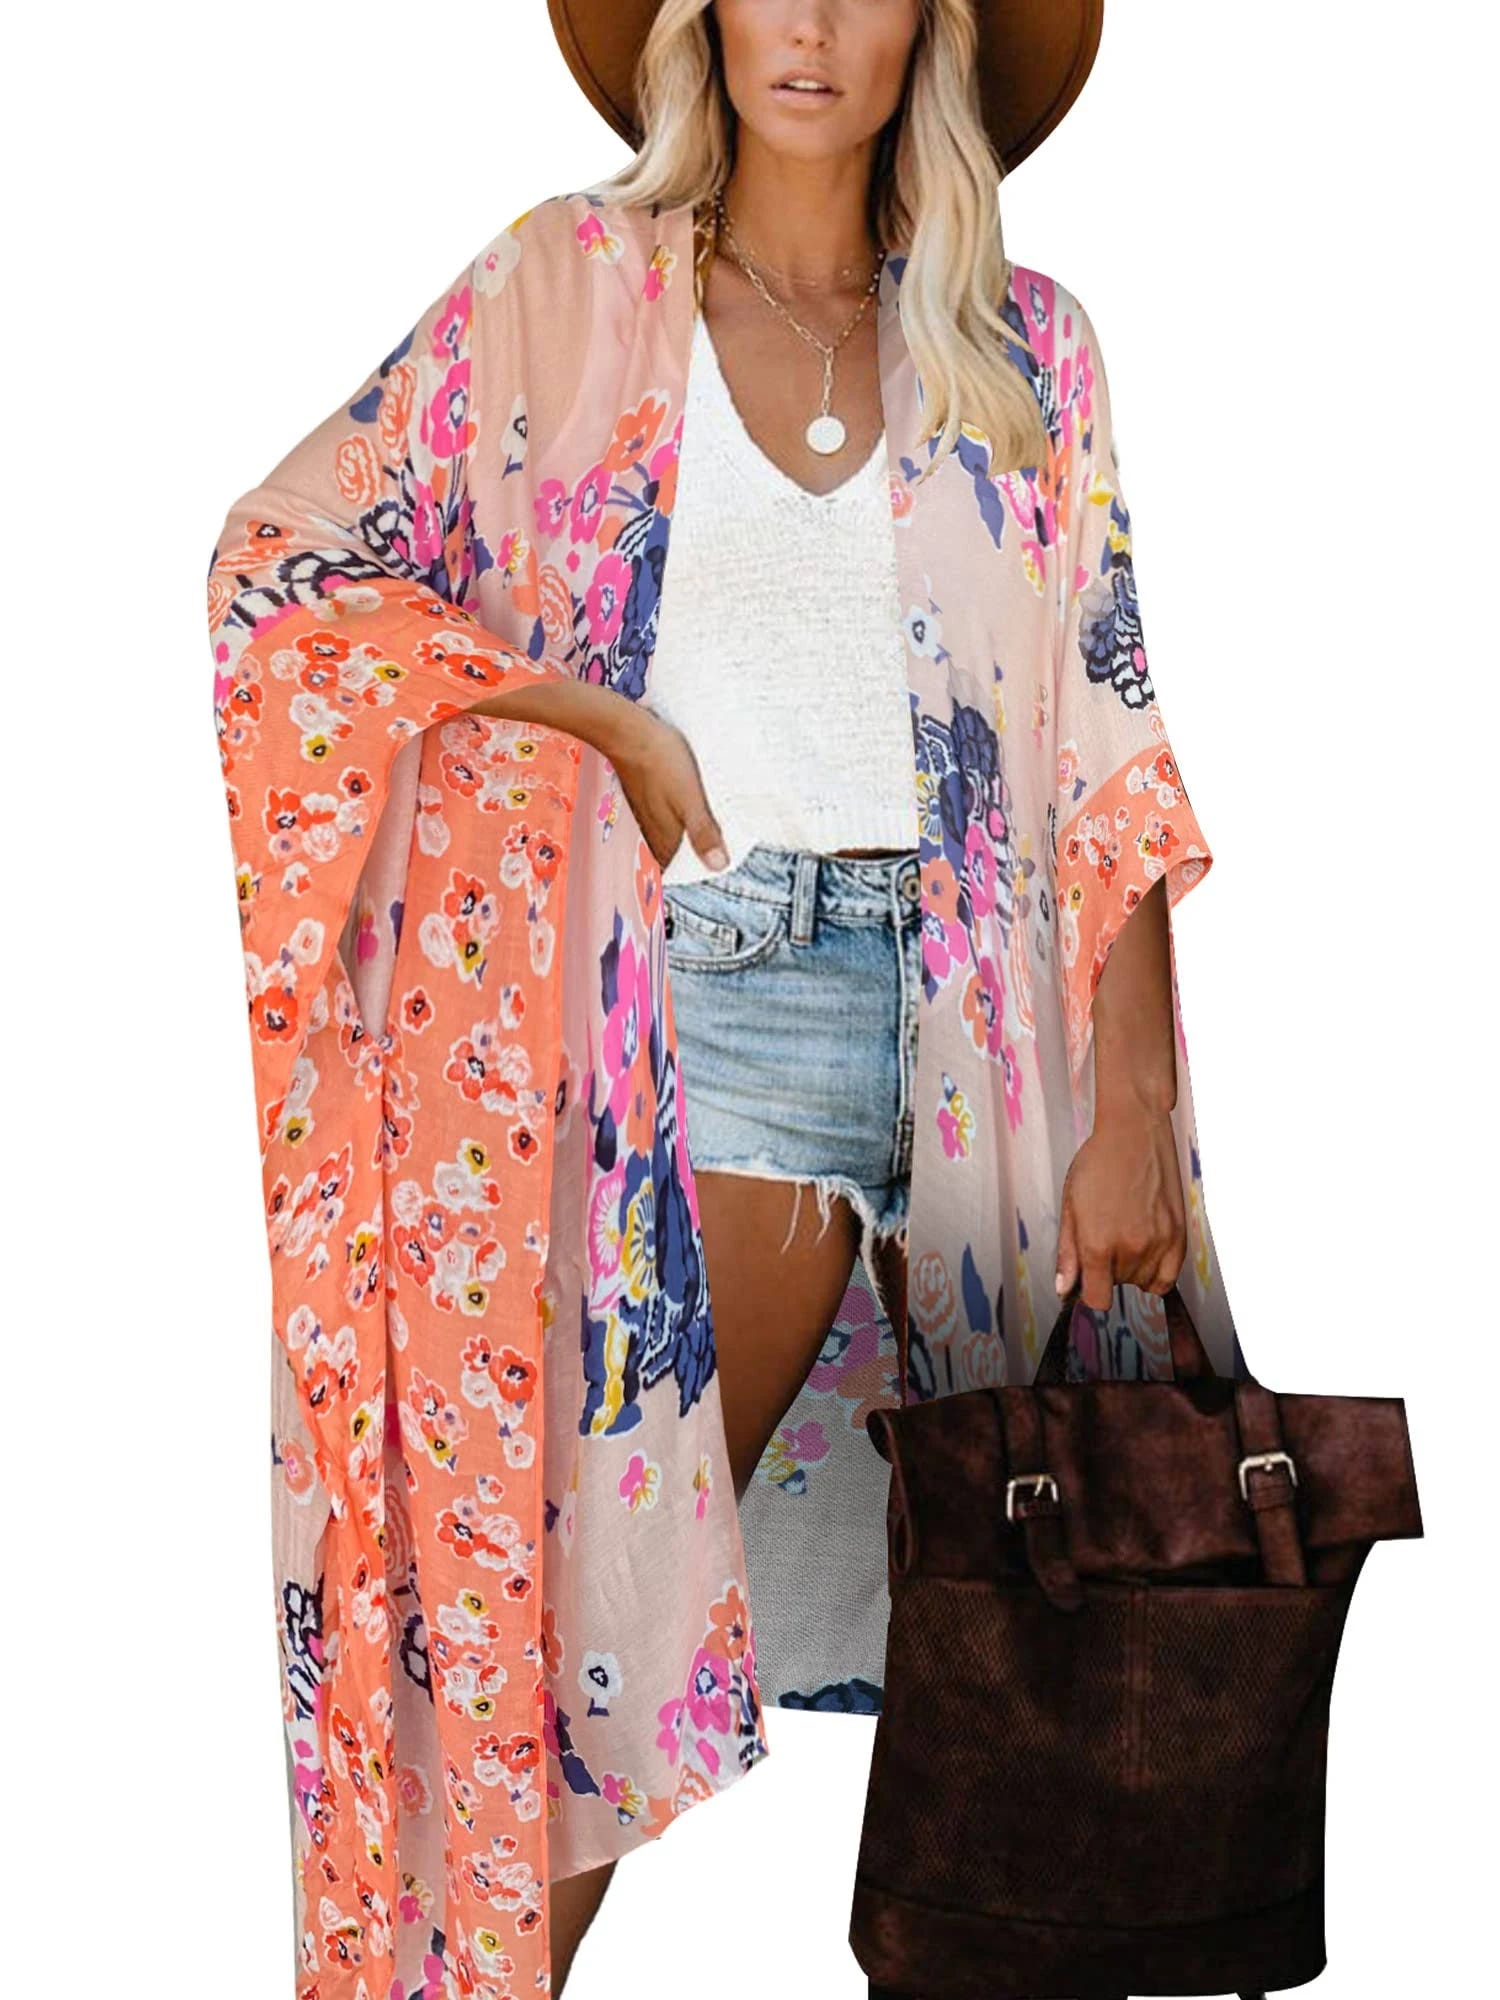 Relaxed Bohemian Beach Cover-Up Swimsuit Kimono | Image